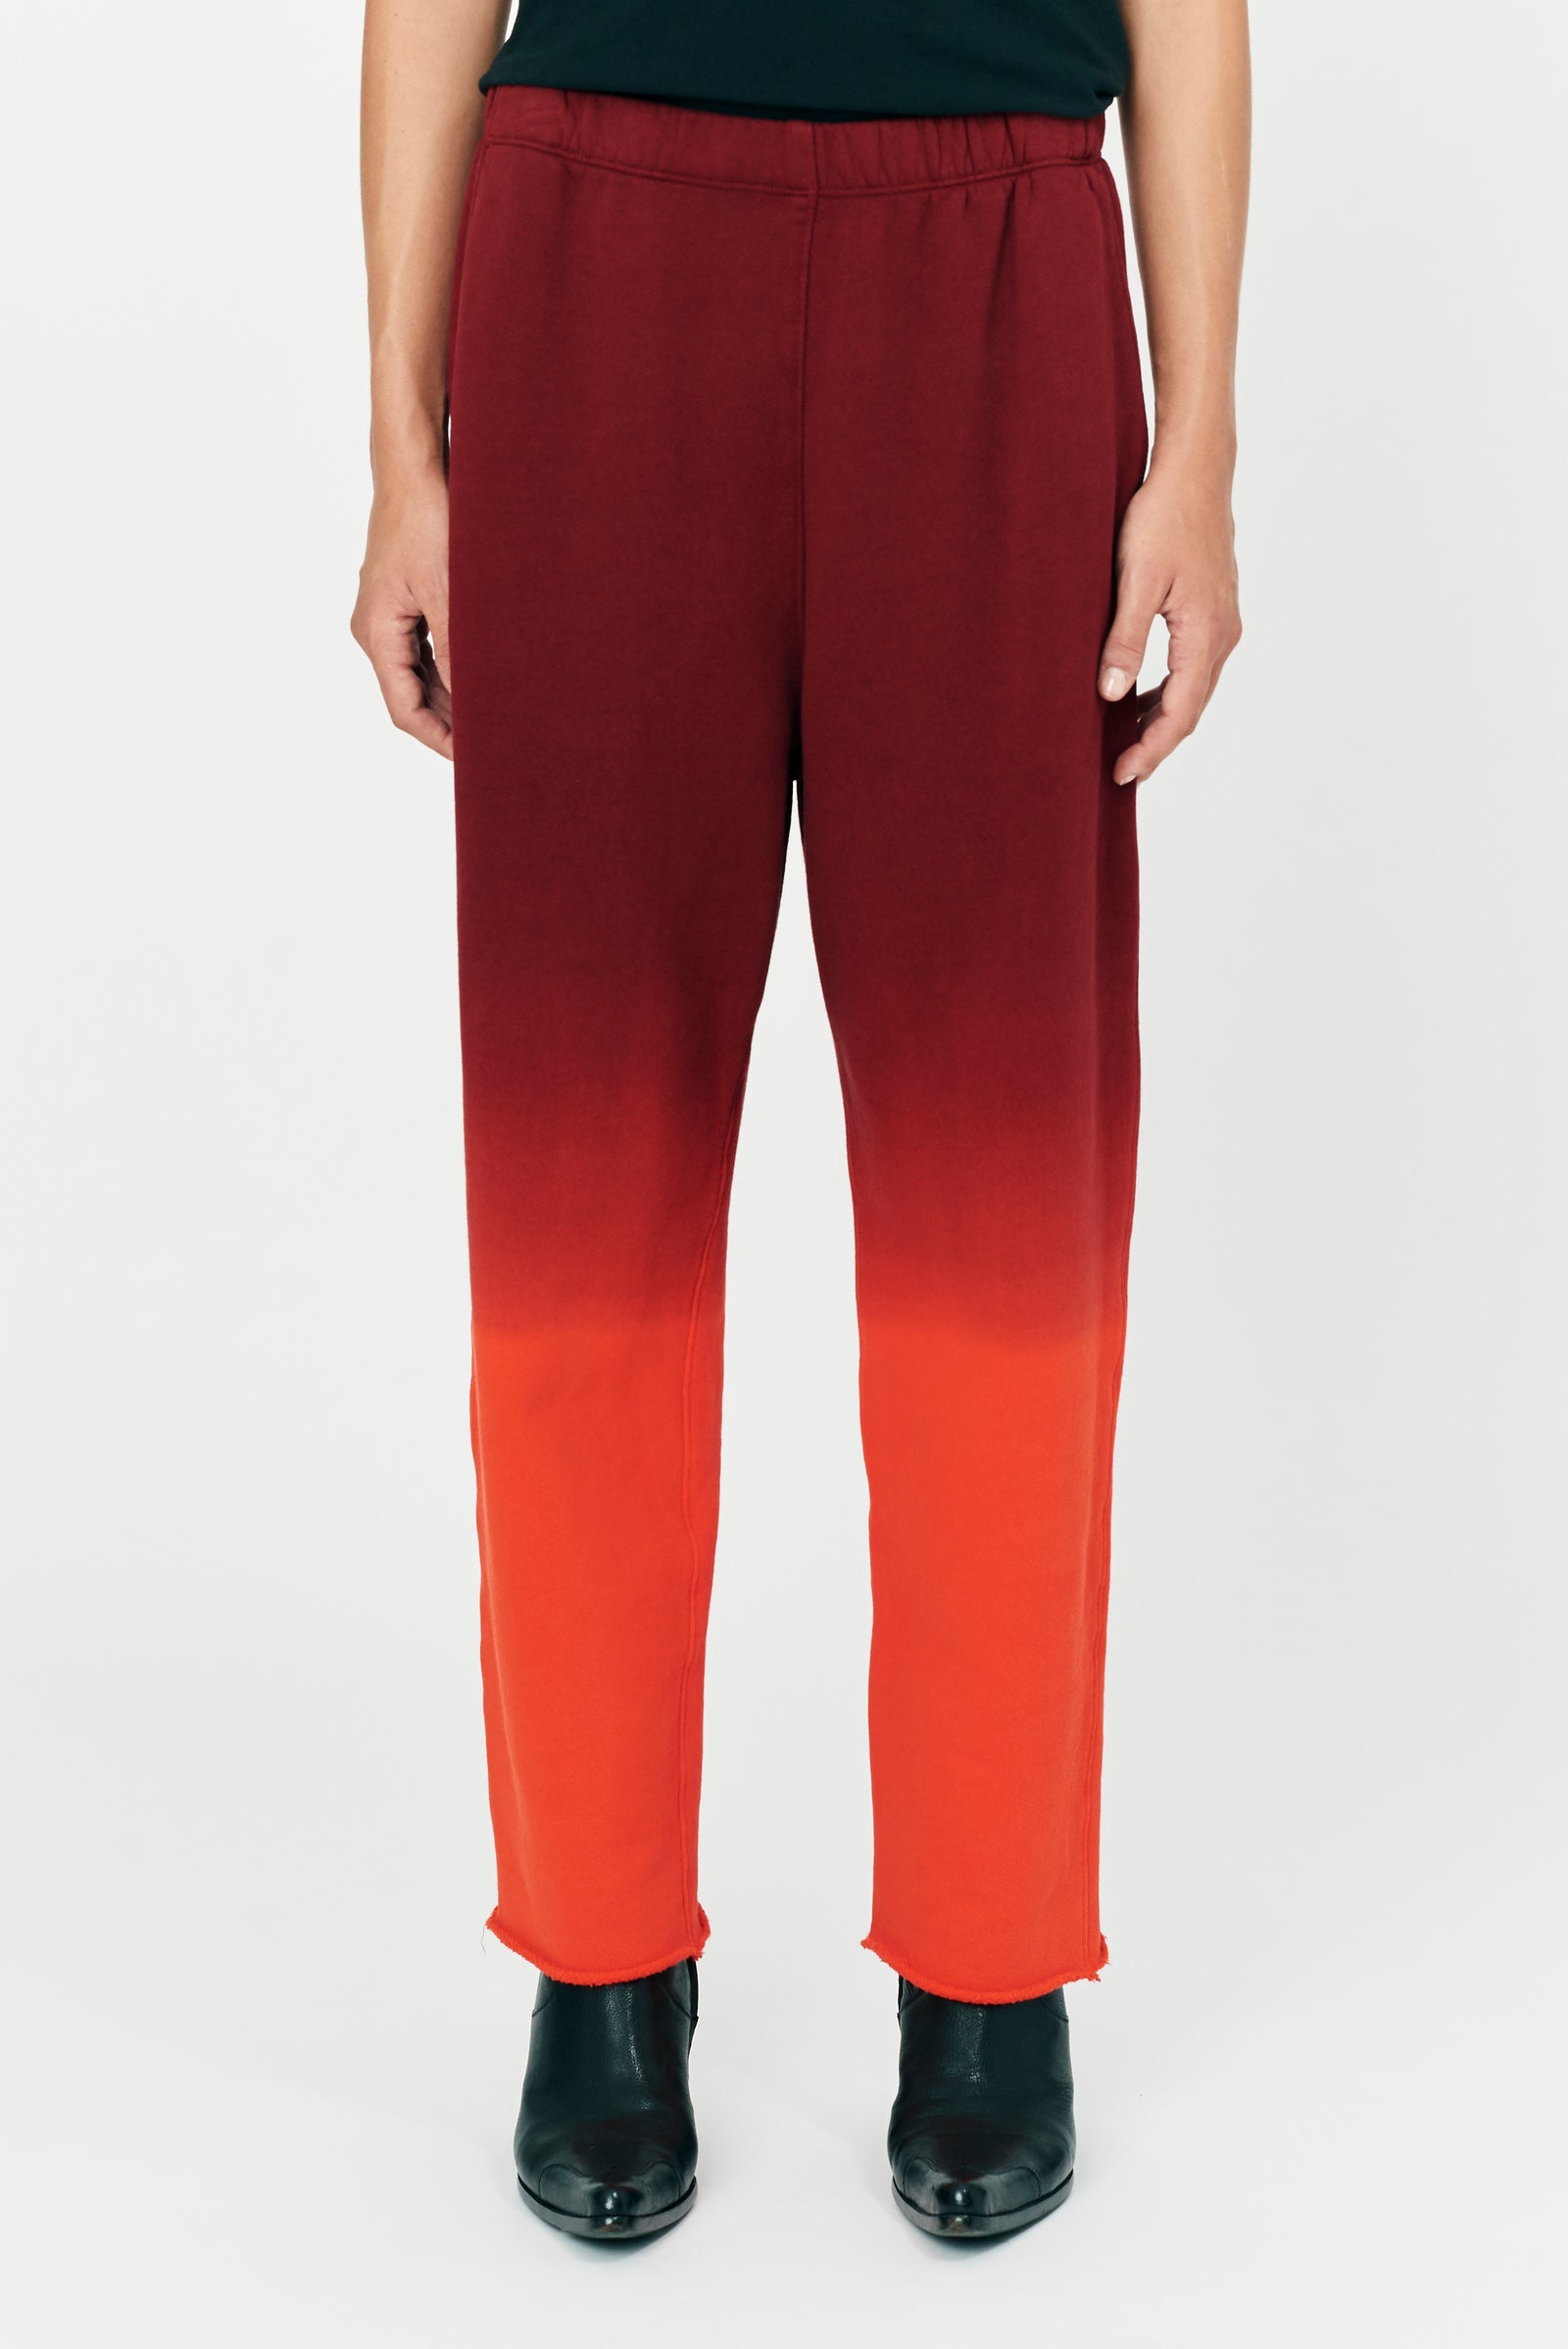 Fire Gradient Reflective Pond and Jersey Ankle Pant Front Close-Up View